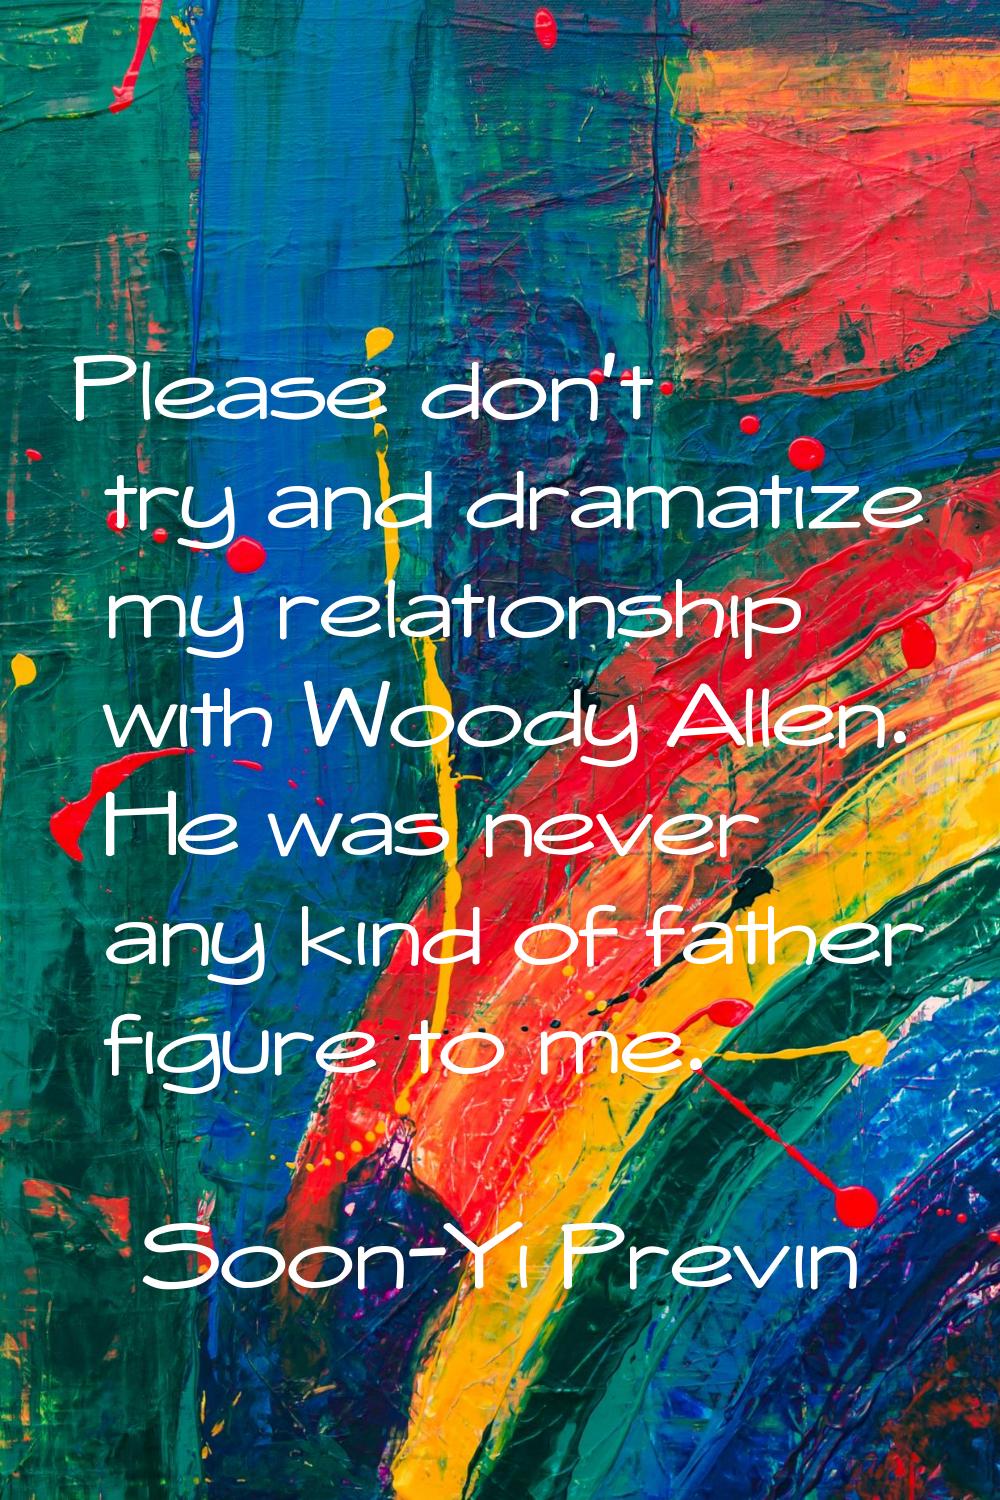 Please don't try and dramatize my relationship with Woody Allen. He was never any kind of father fi